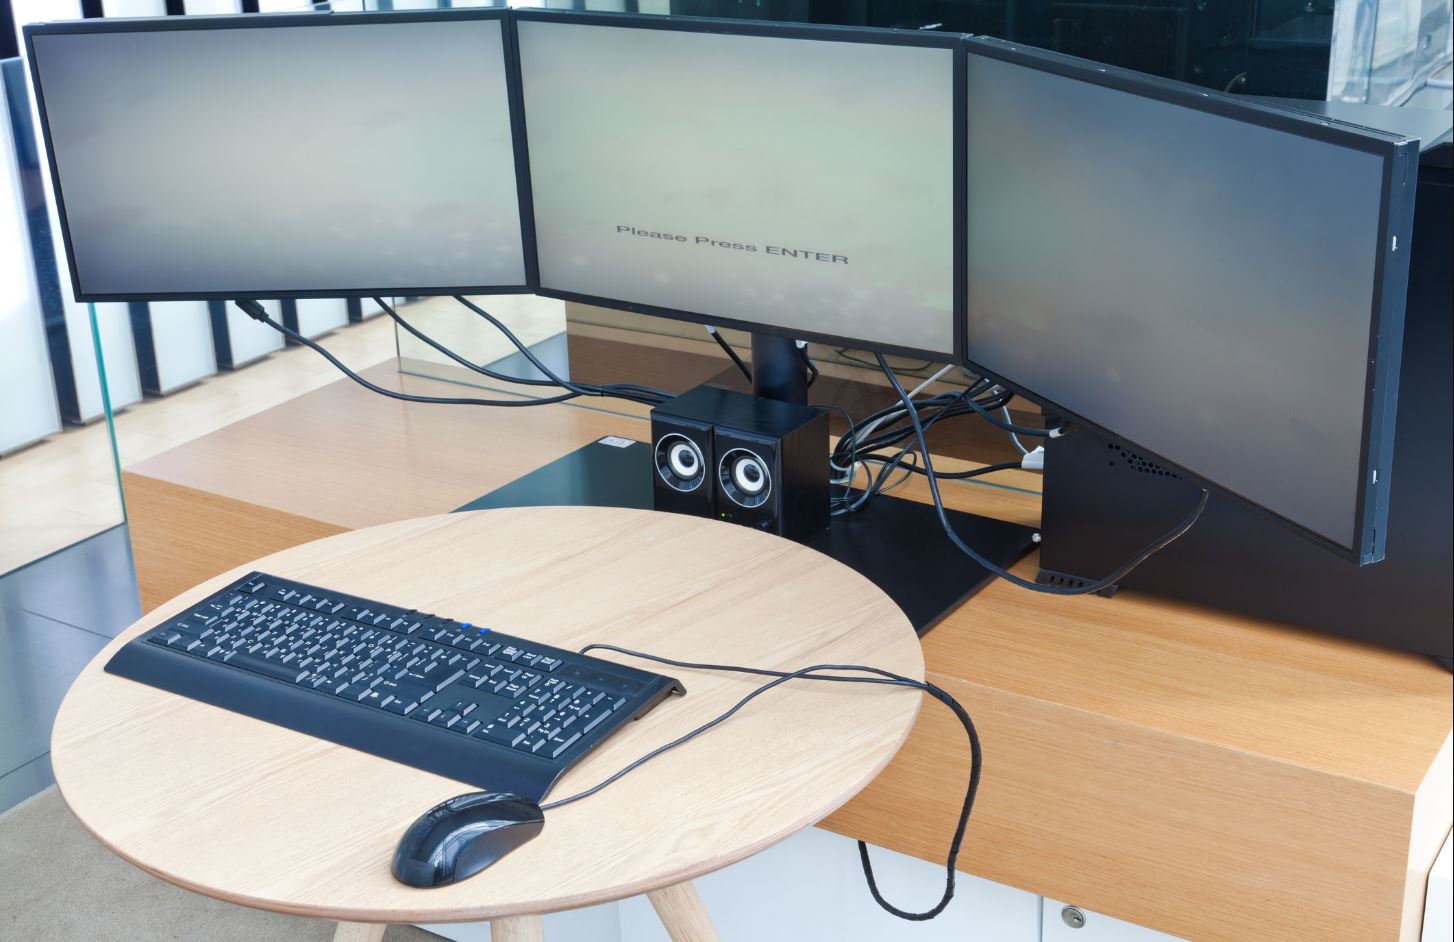 How to connect three monitors to a pc